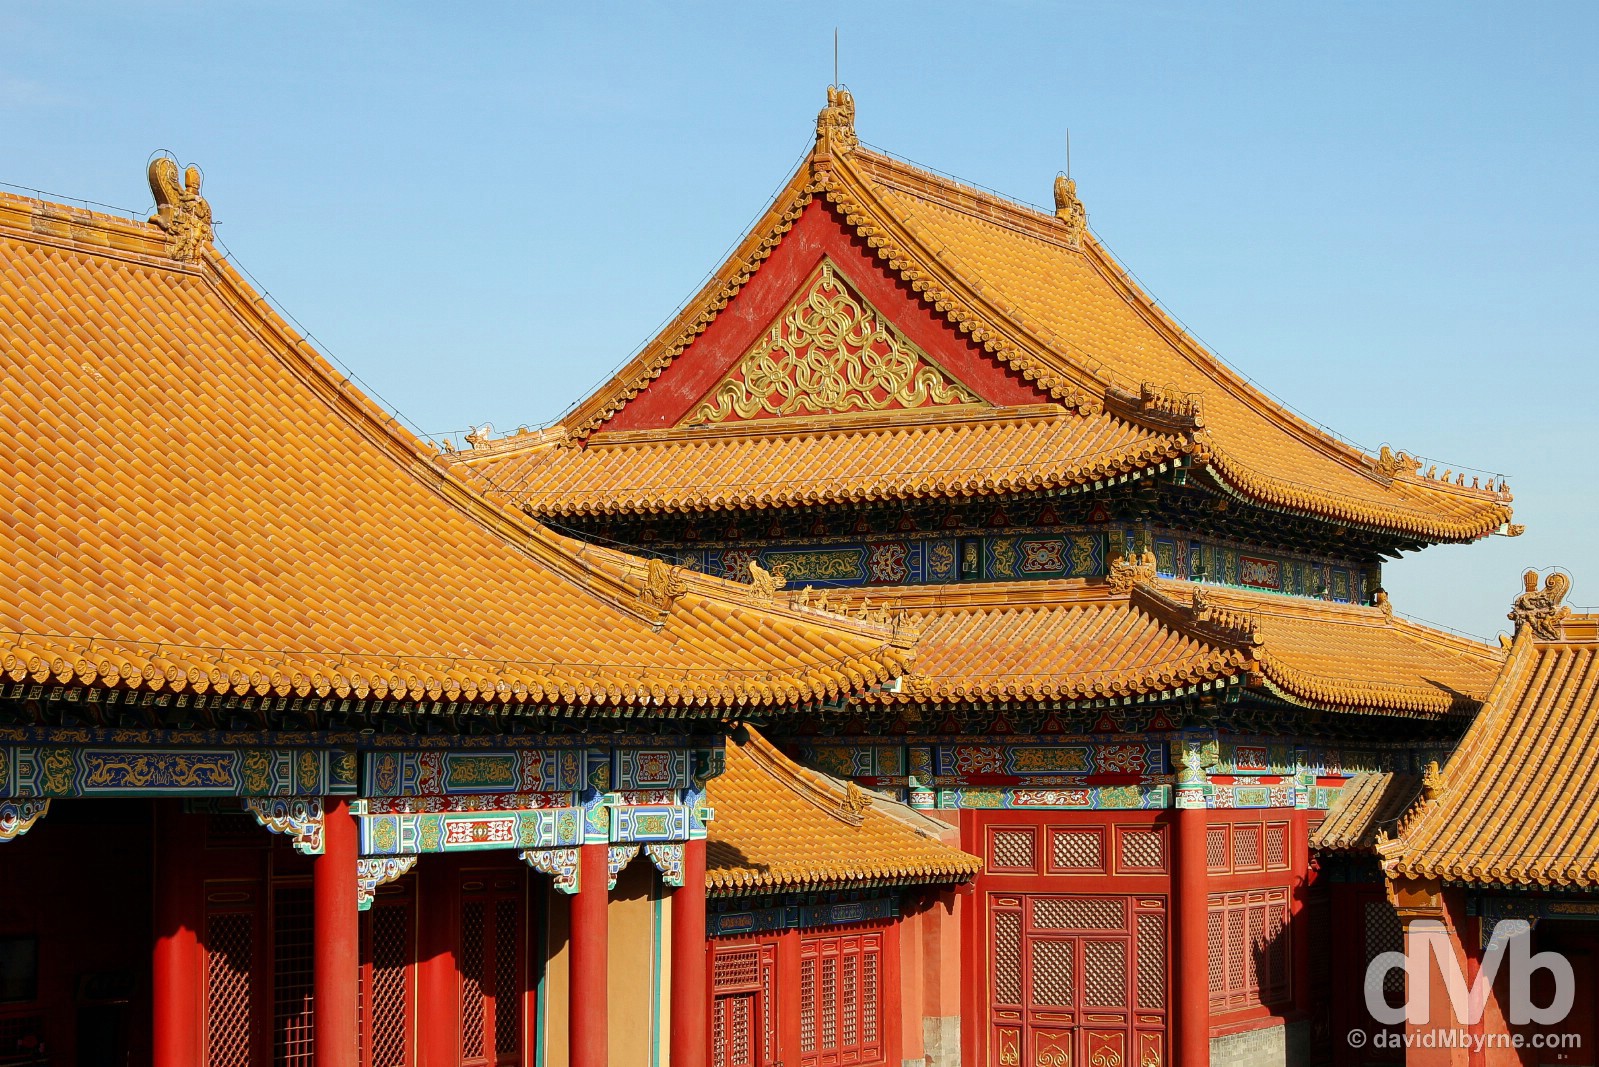 Buildings in the Place Museum, a.k.a. The Forbidden City, in Beijing, China. February 4, 2015.